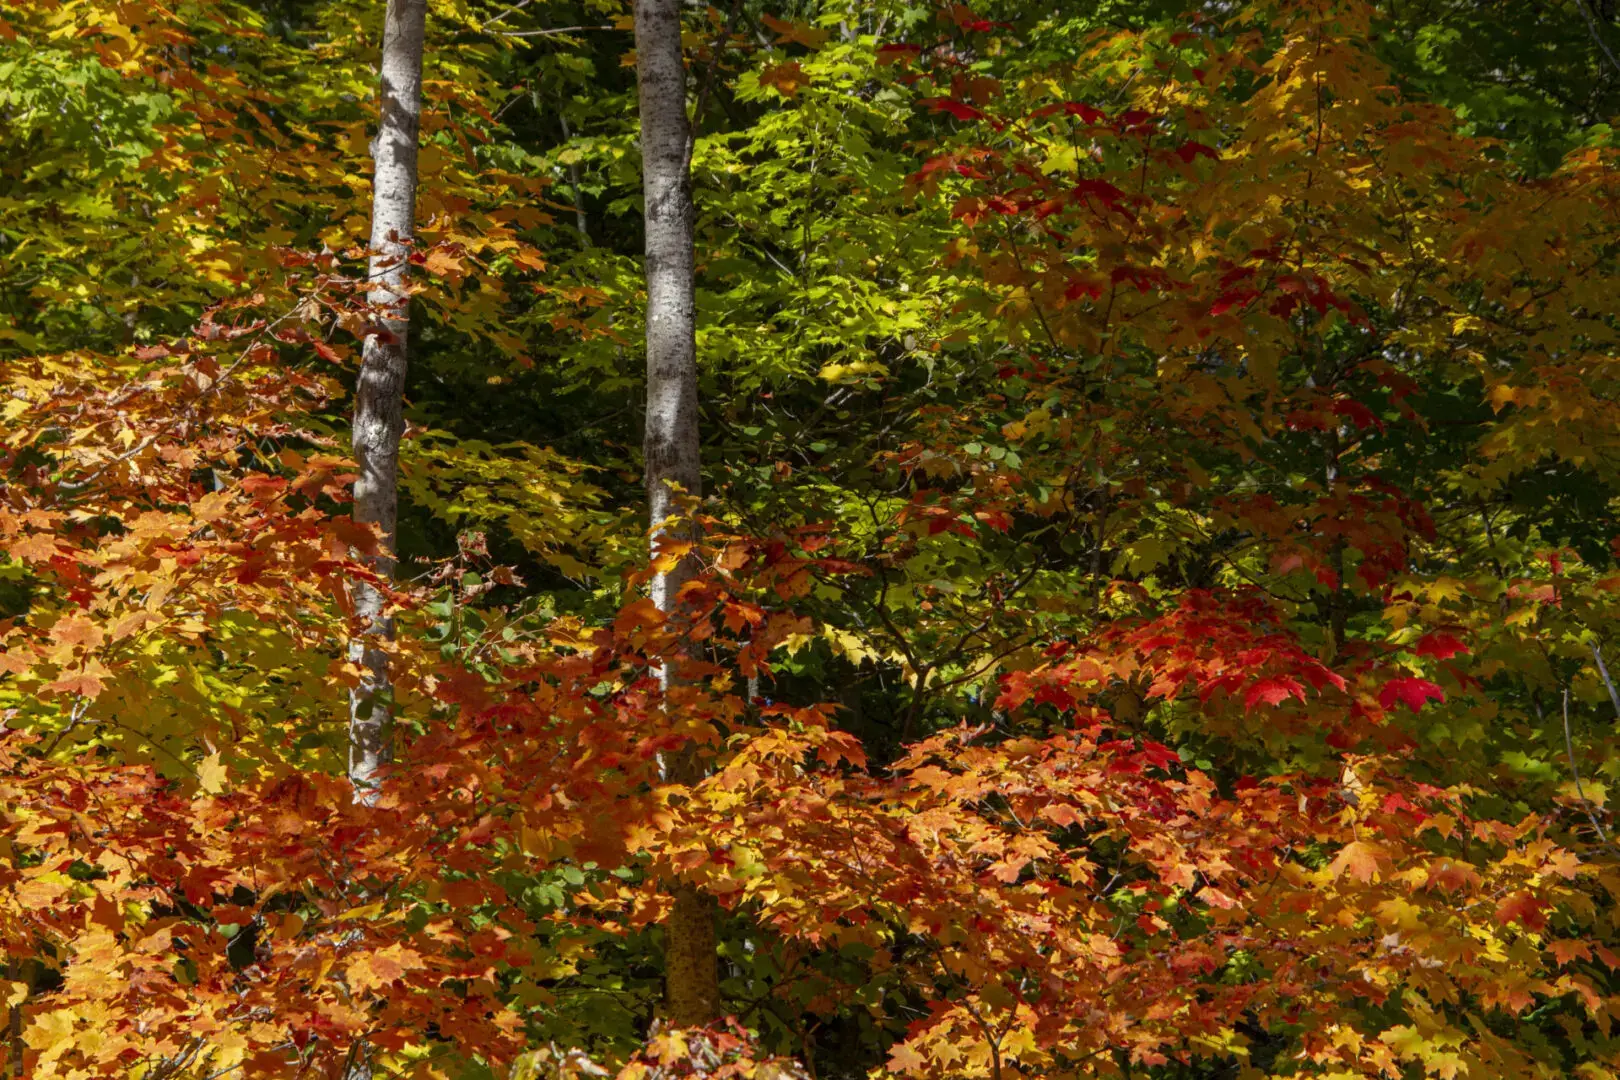 A forest full of colorful leaves in the fall.